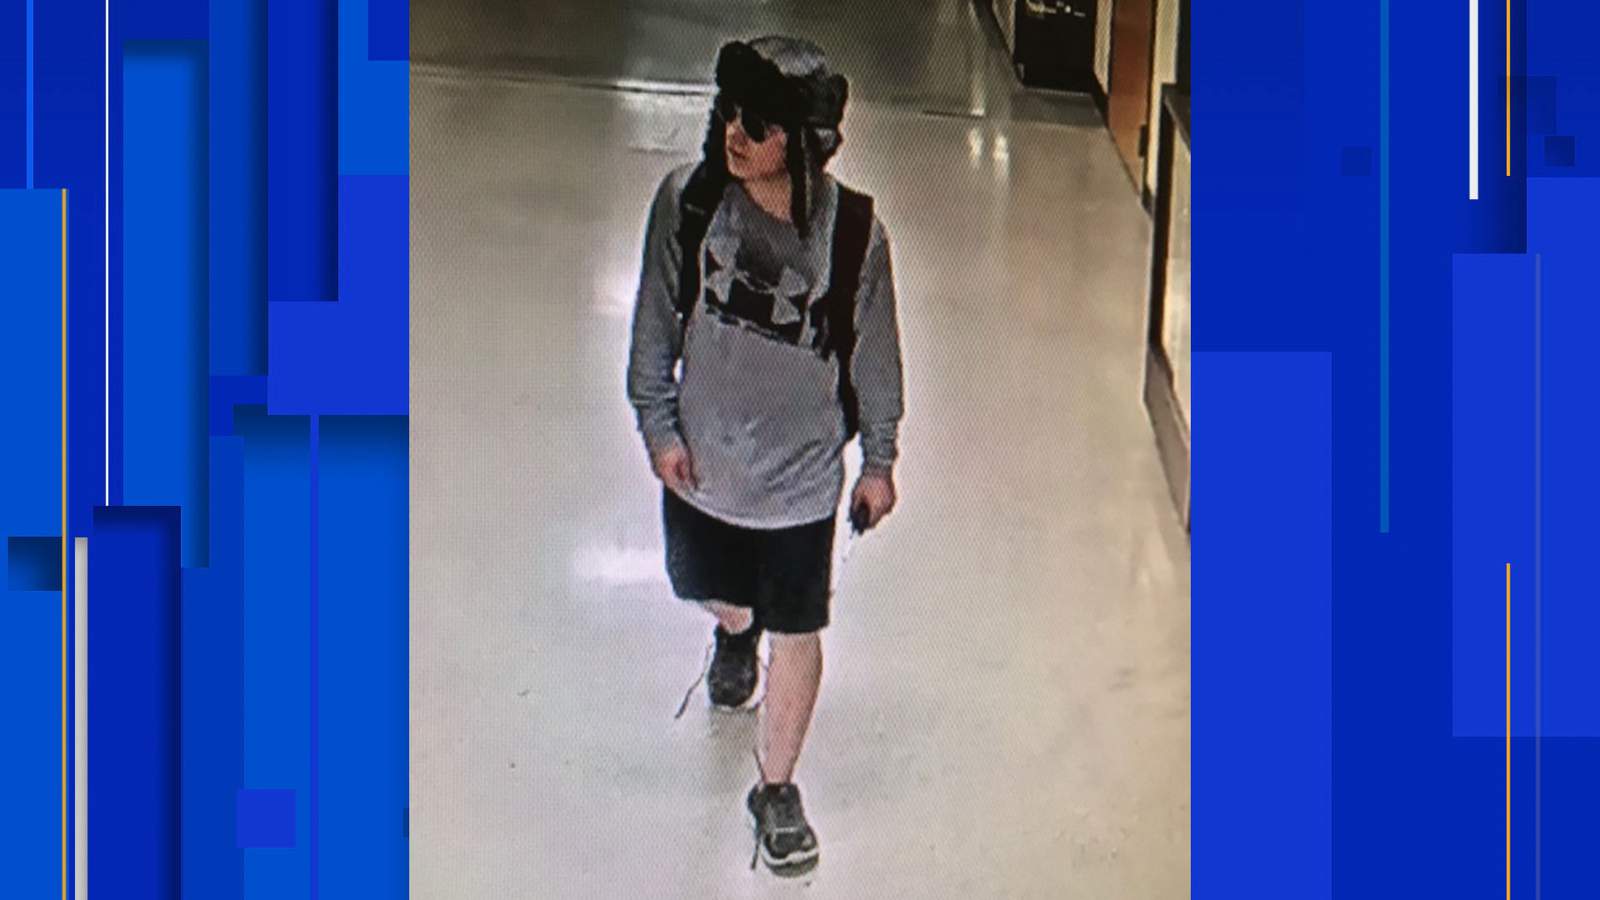 Police ask for help identifying person who broke into Steele High School